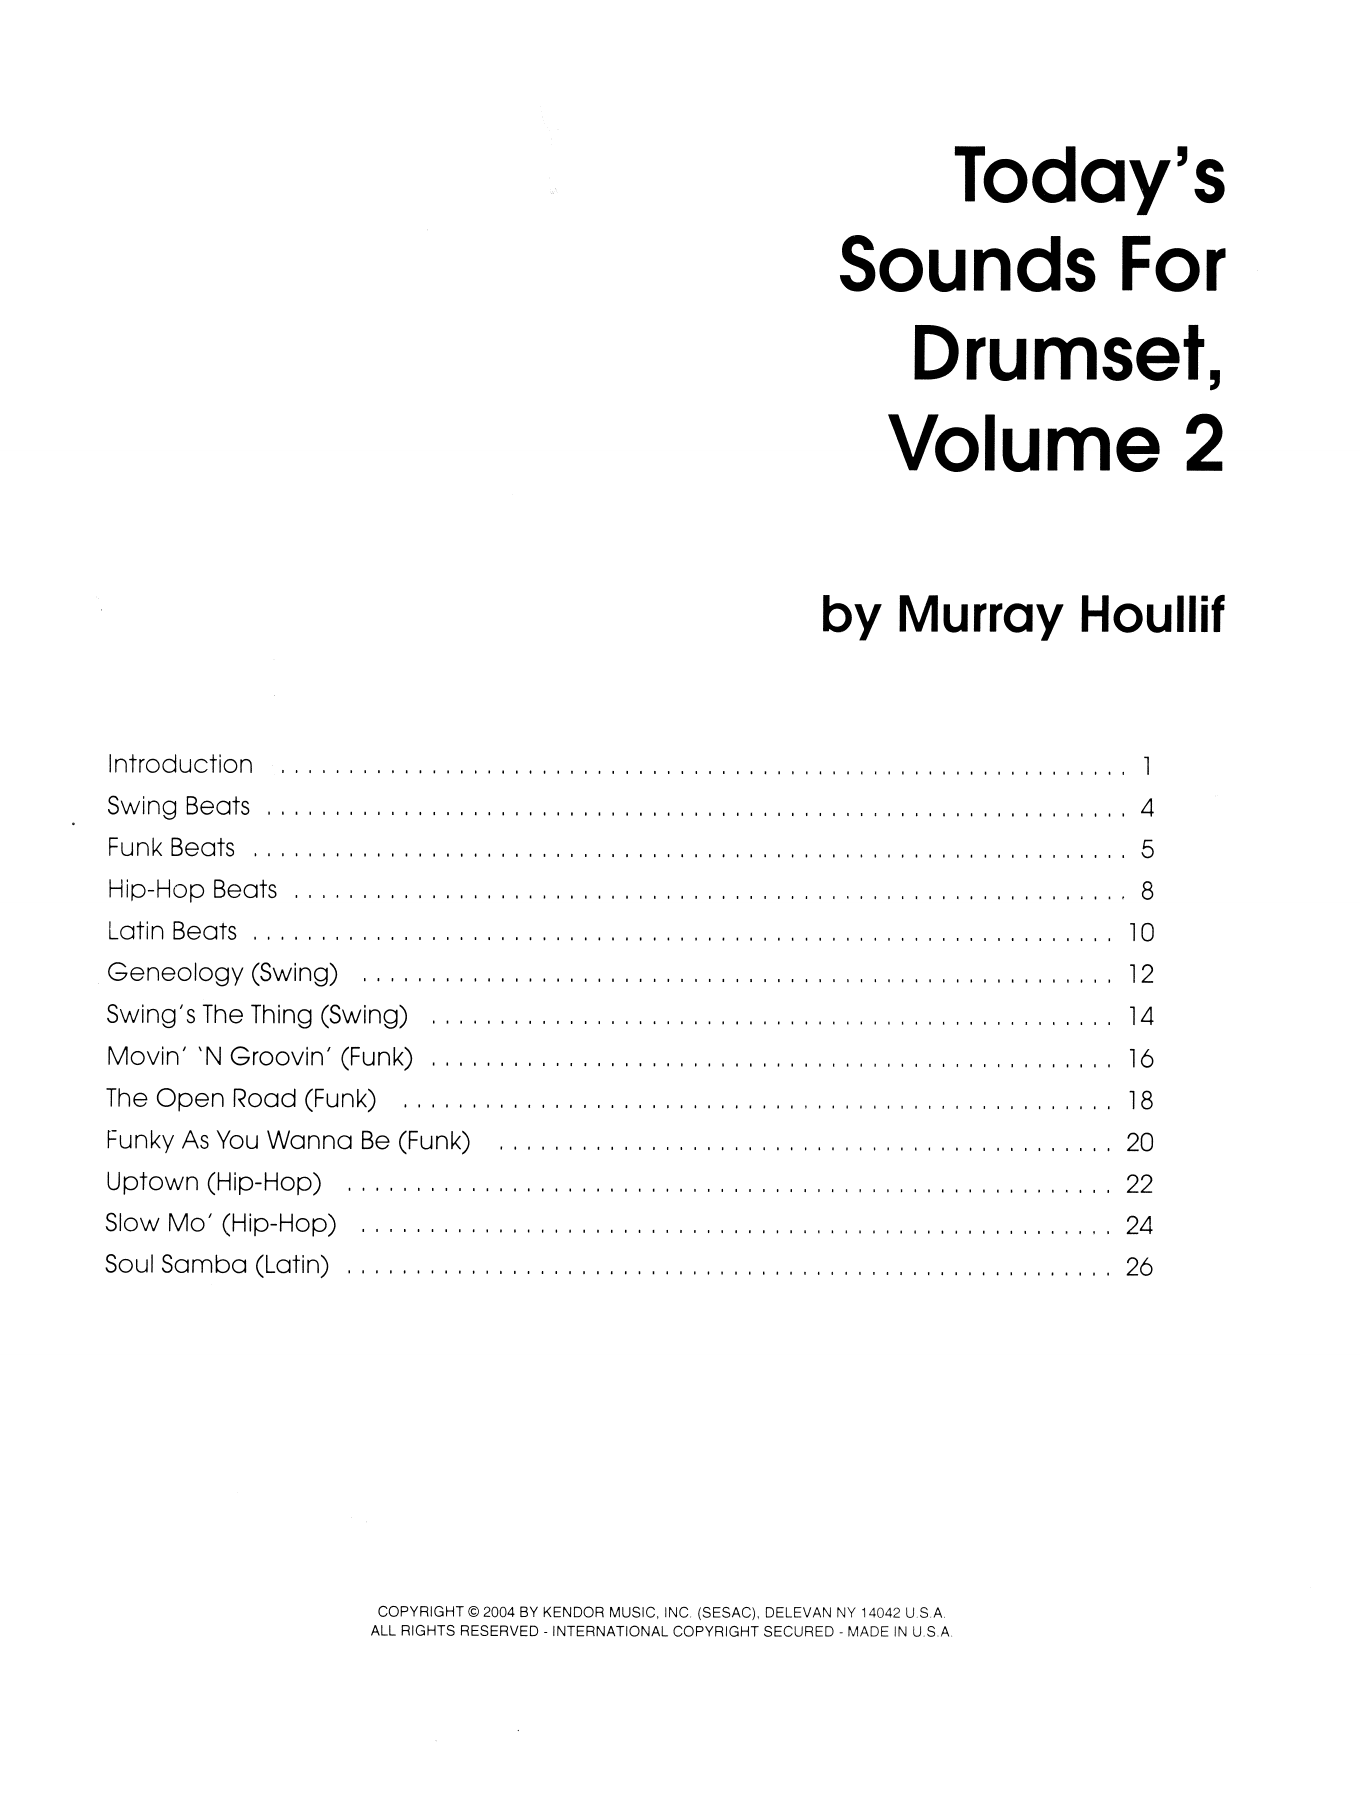 Download Murray Houllif Today's Sounds For Drumset, Volume 2 Sheet Music